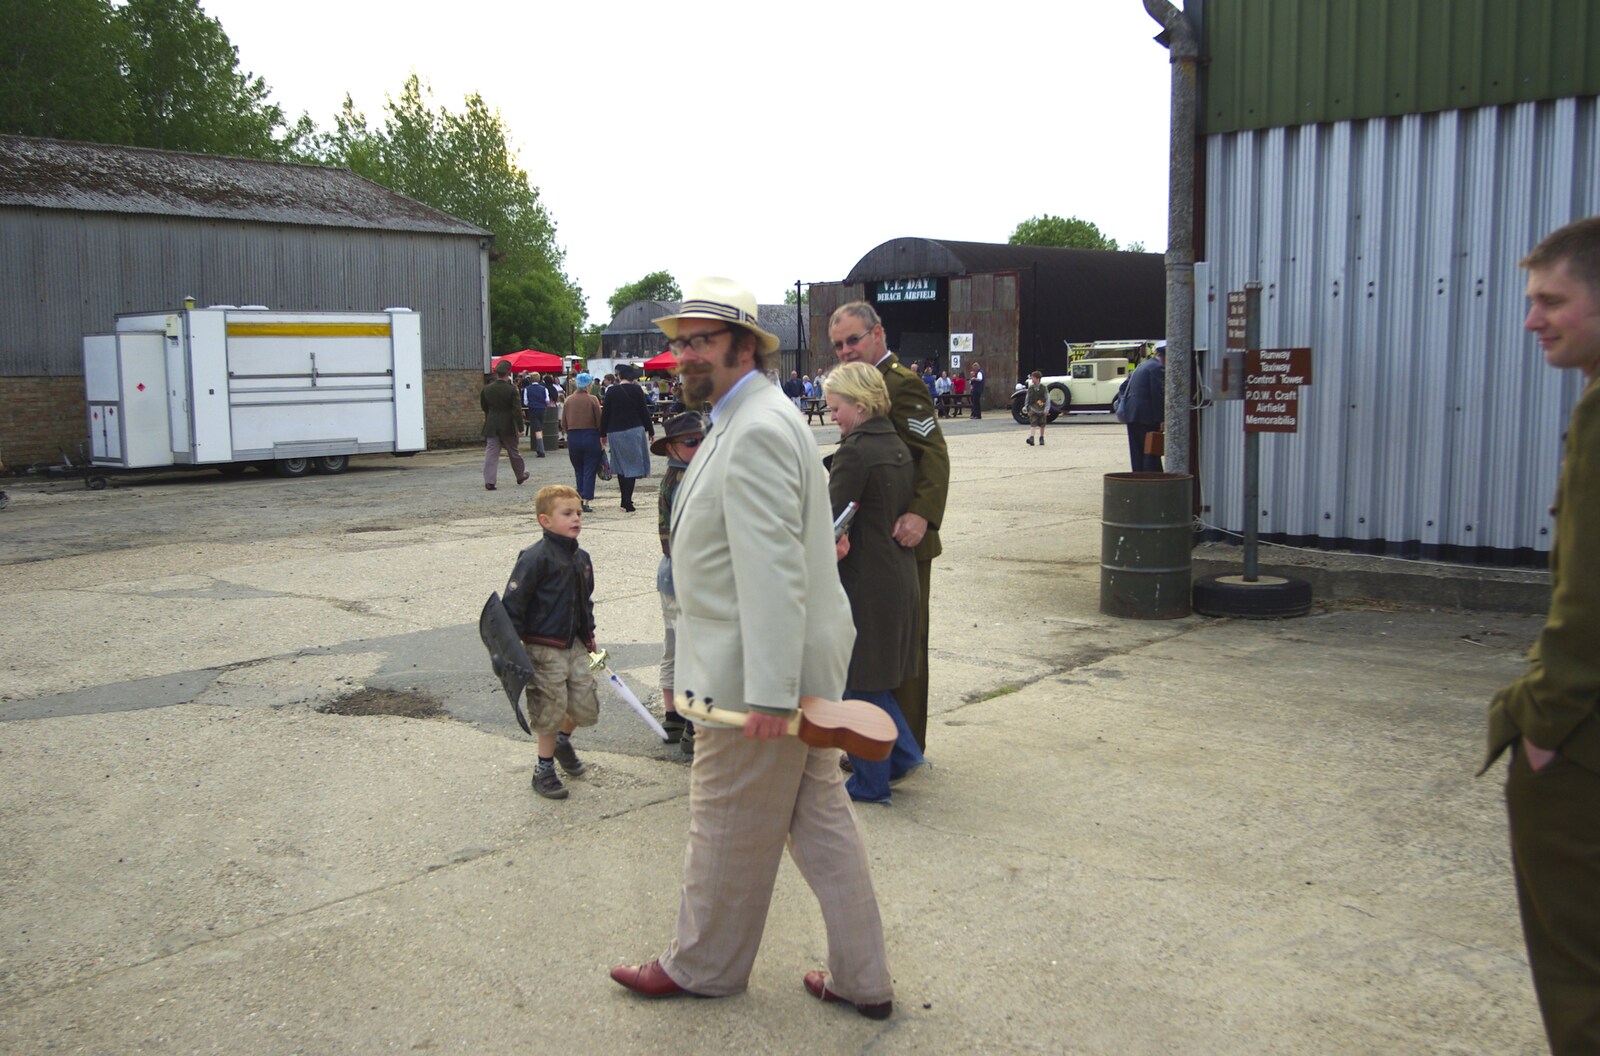 Noddy leads the way to the hangars from The Debach Airfield 1940s Dance, Debach, Suffolk - 6th June 2009